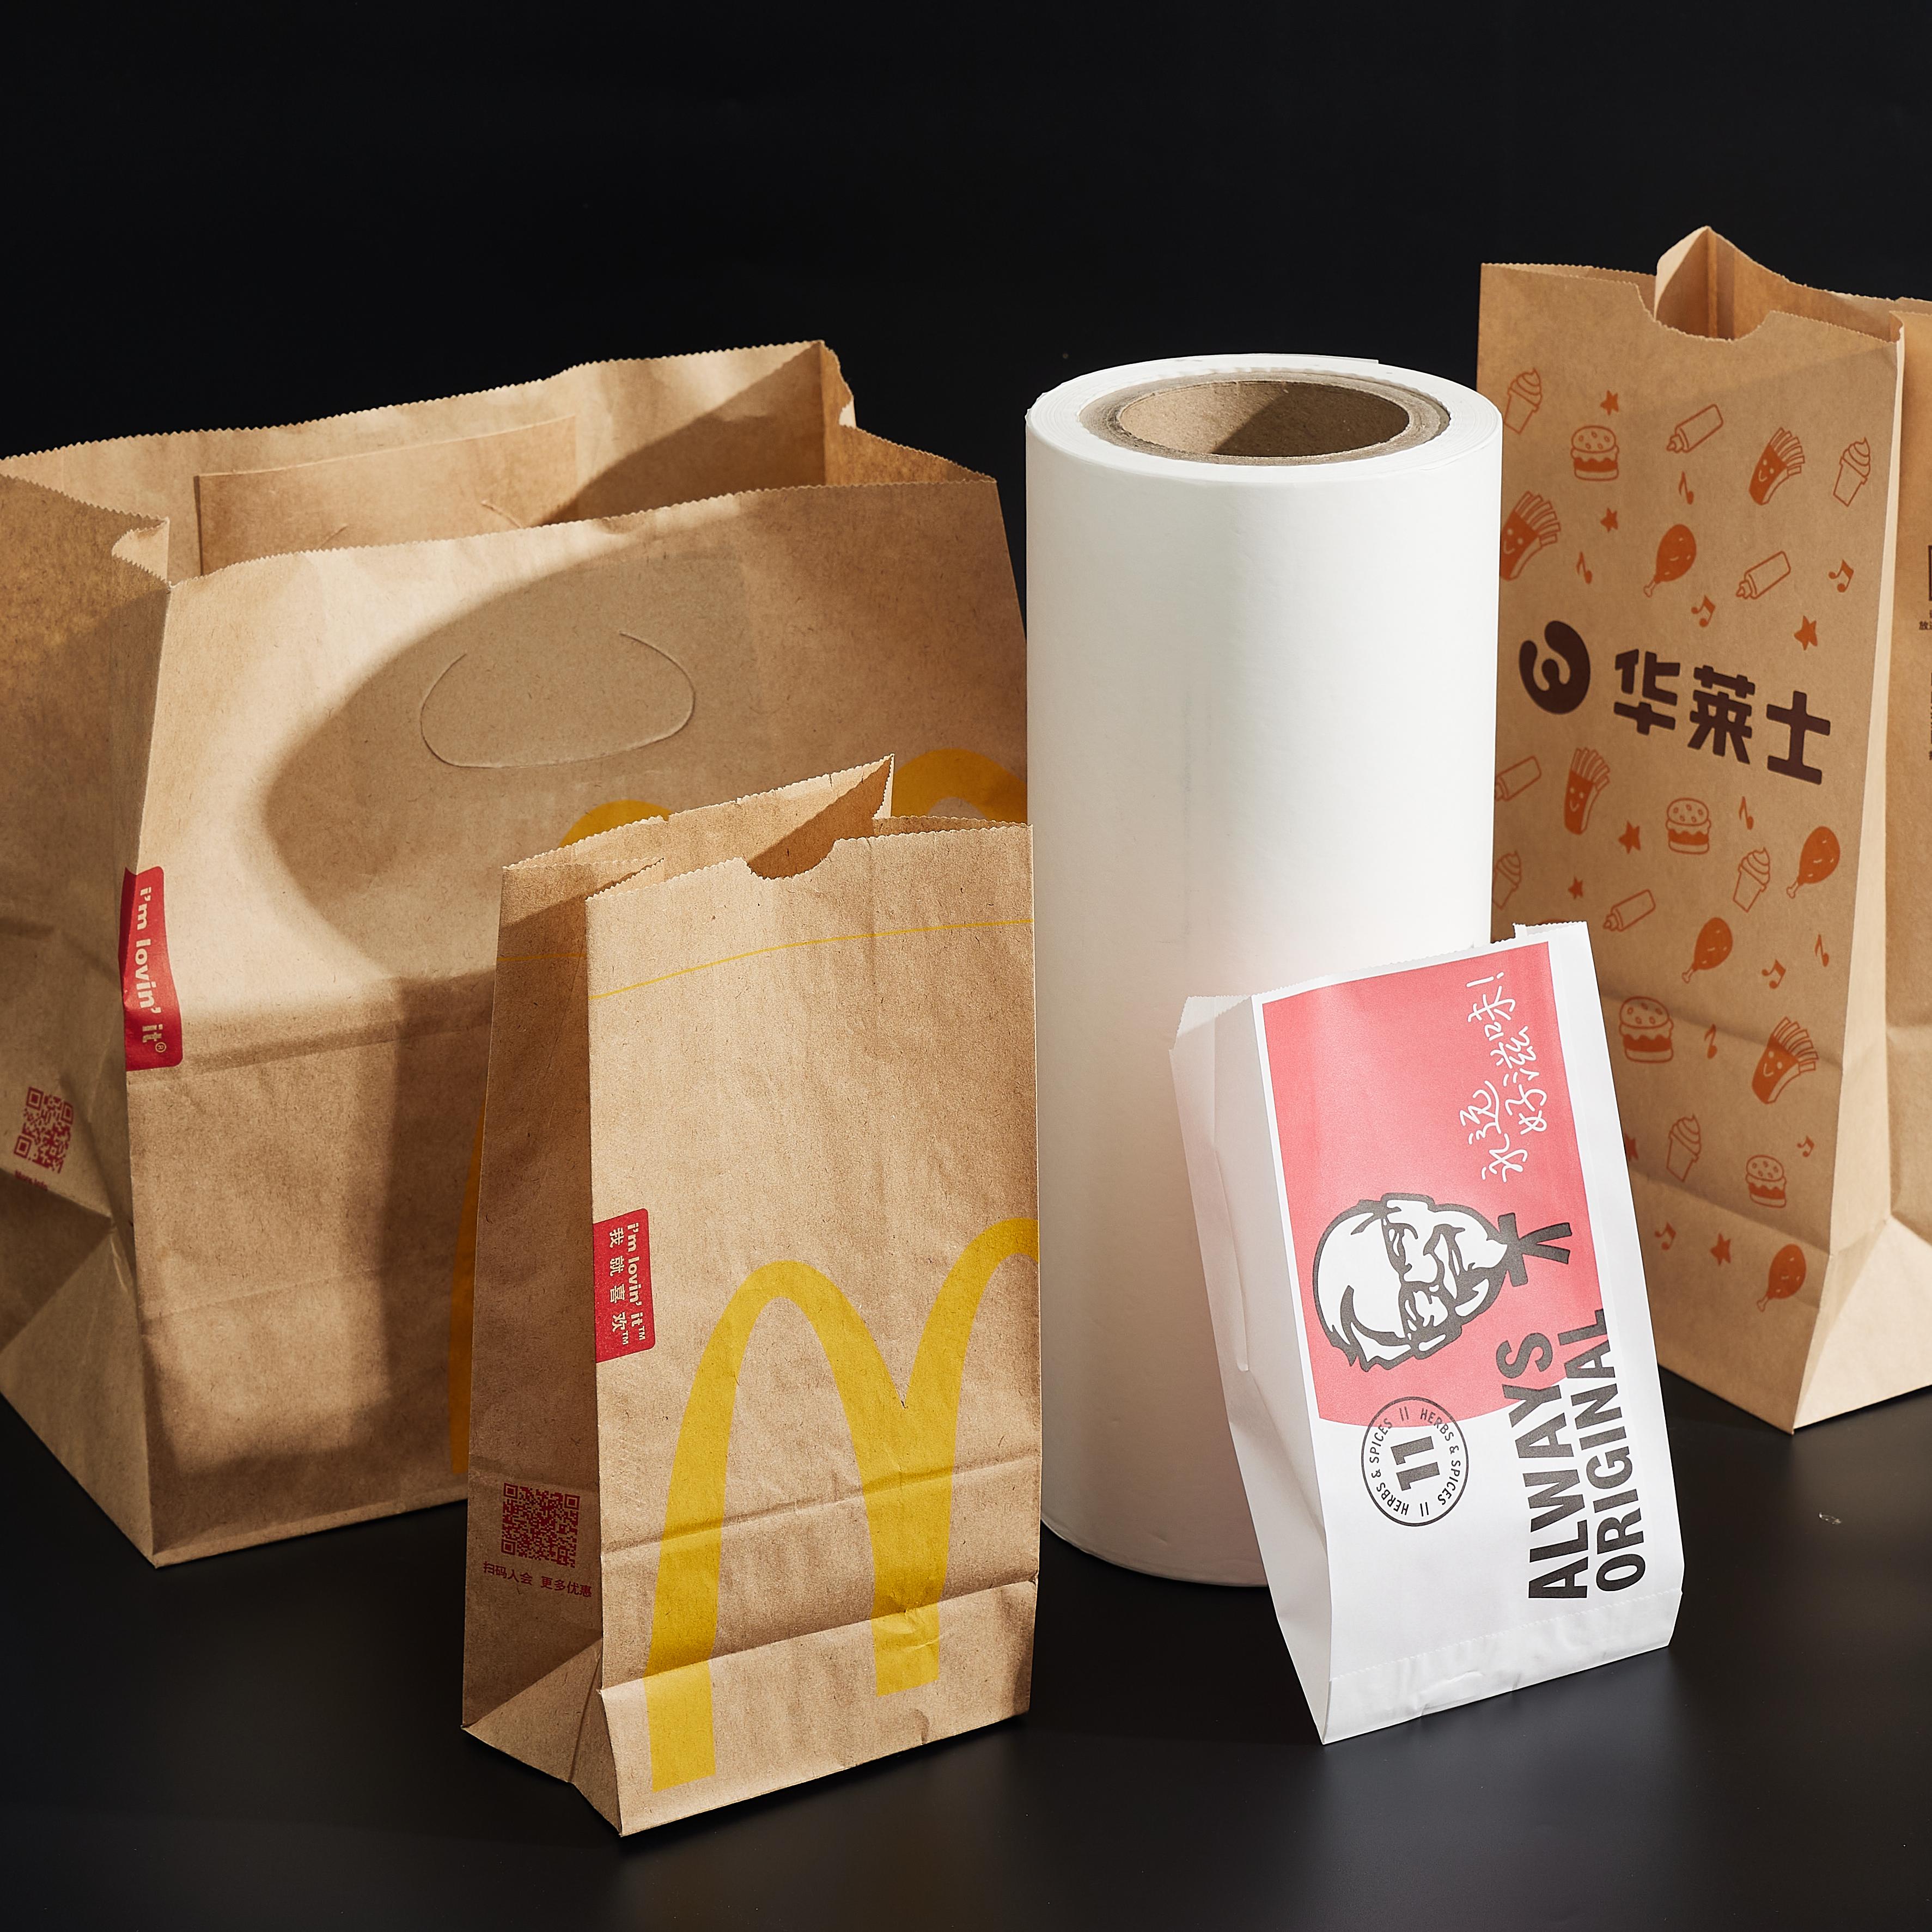 38-40g Pfas-Free Greaseproof Paper High Quality Ogr Paper for Food Wrapping FDA EU Standards